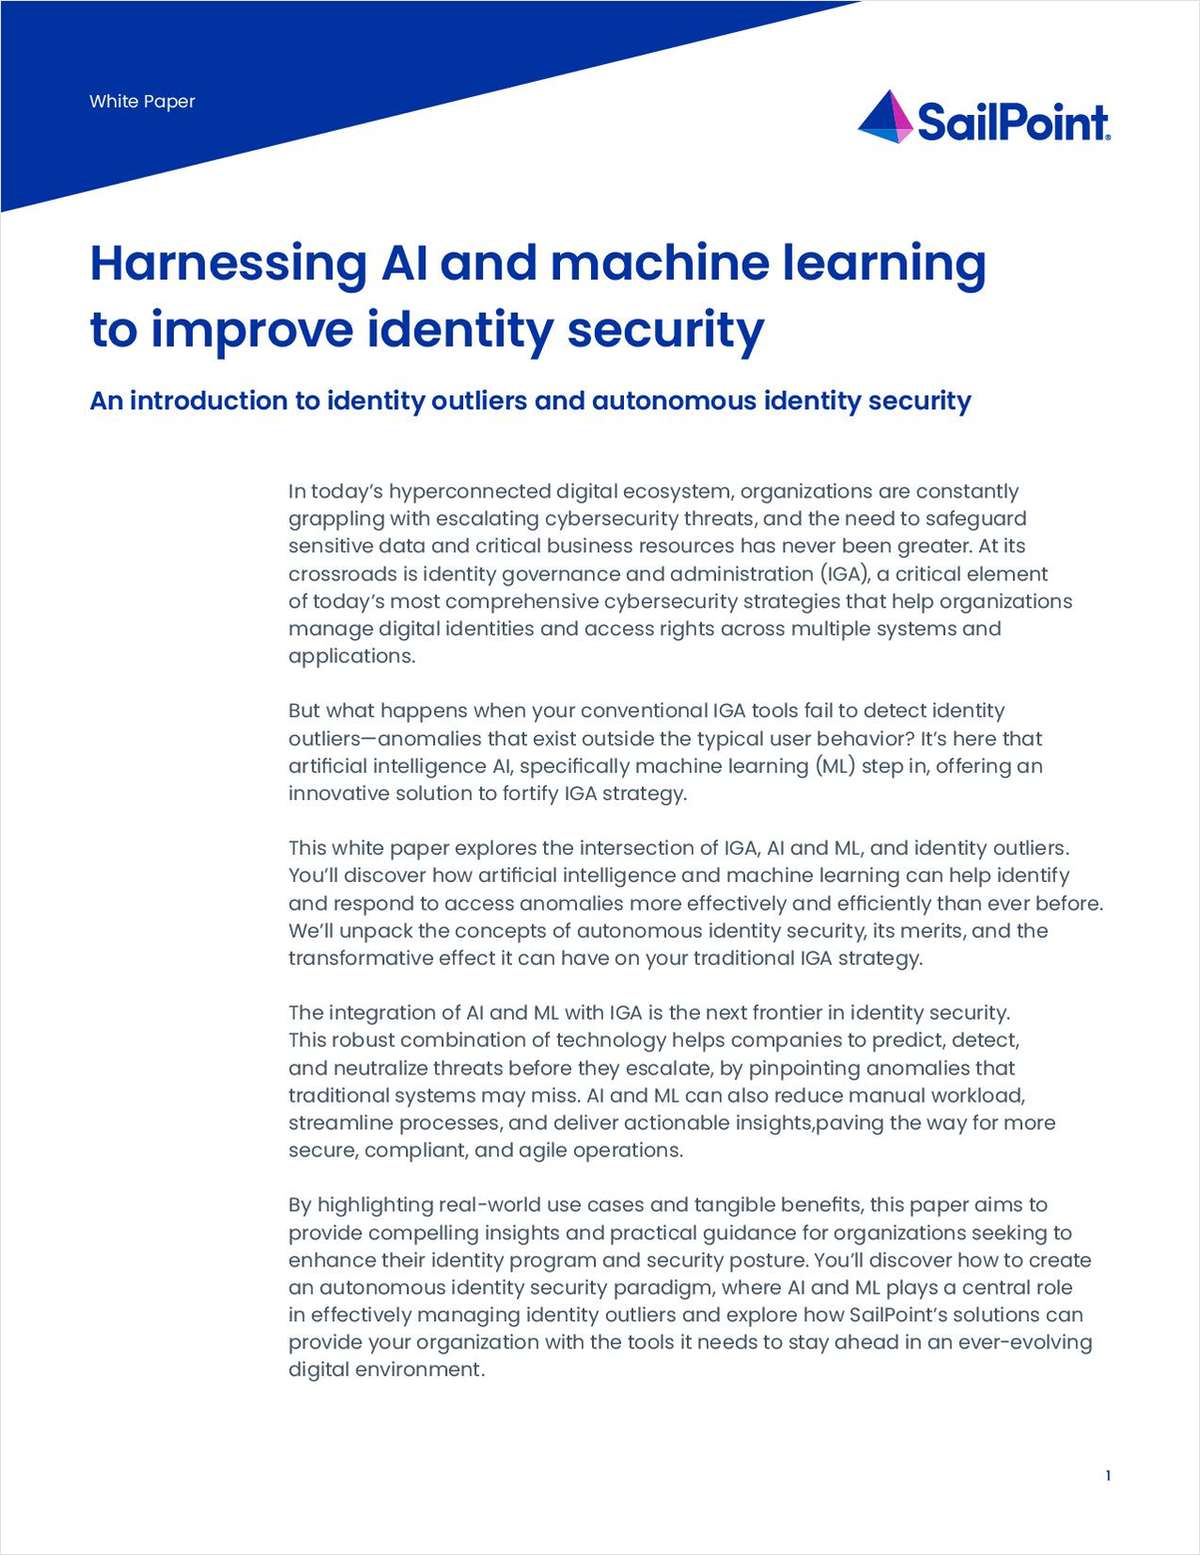 Harnessing AI and Machine Learning for Improved Identity Security